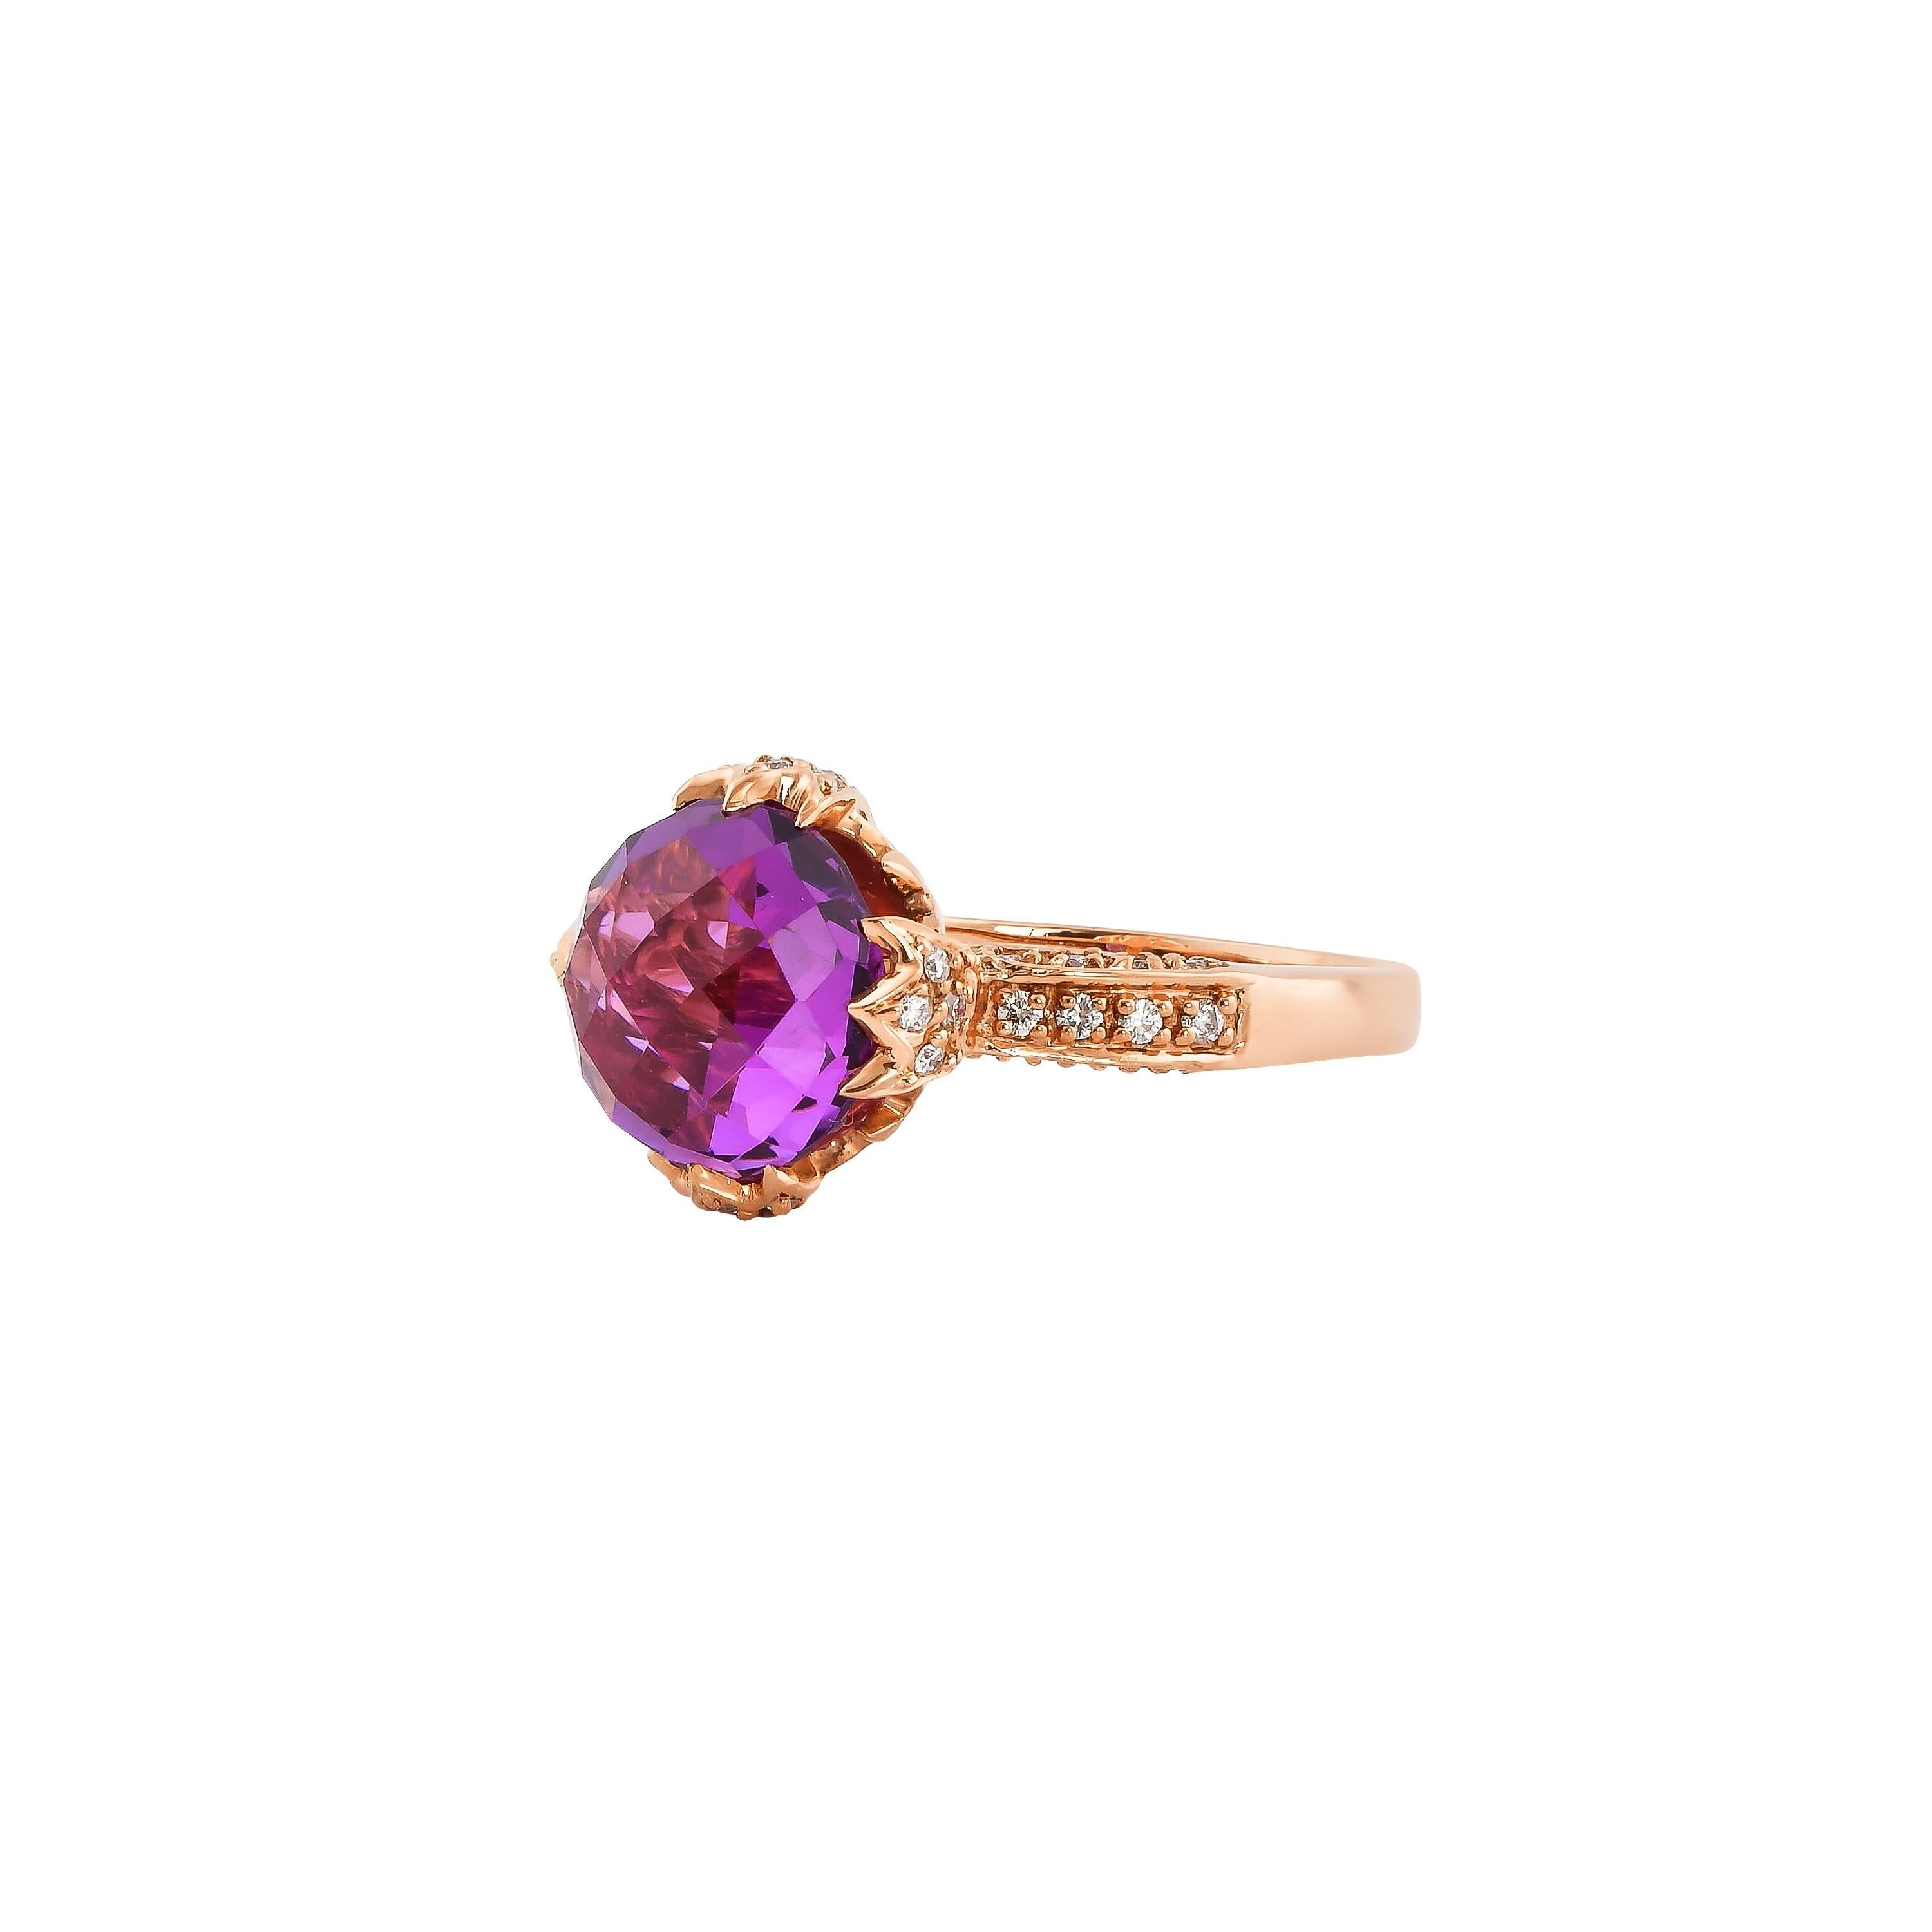 Contemporary 6.7 Carat Amethyst and Diamond Ring in 14 Karat Rose Gold For Sale